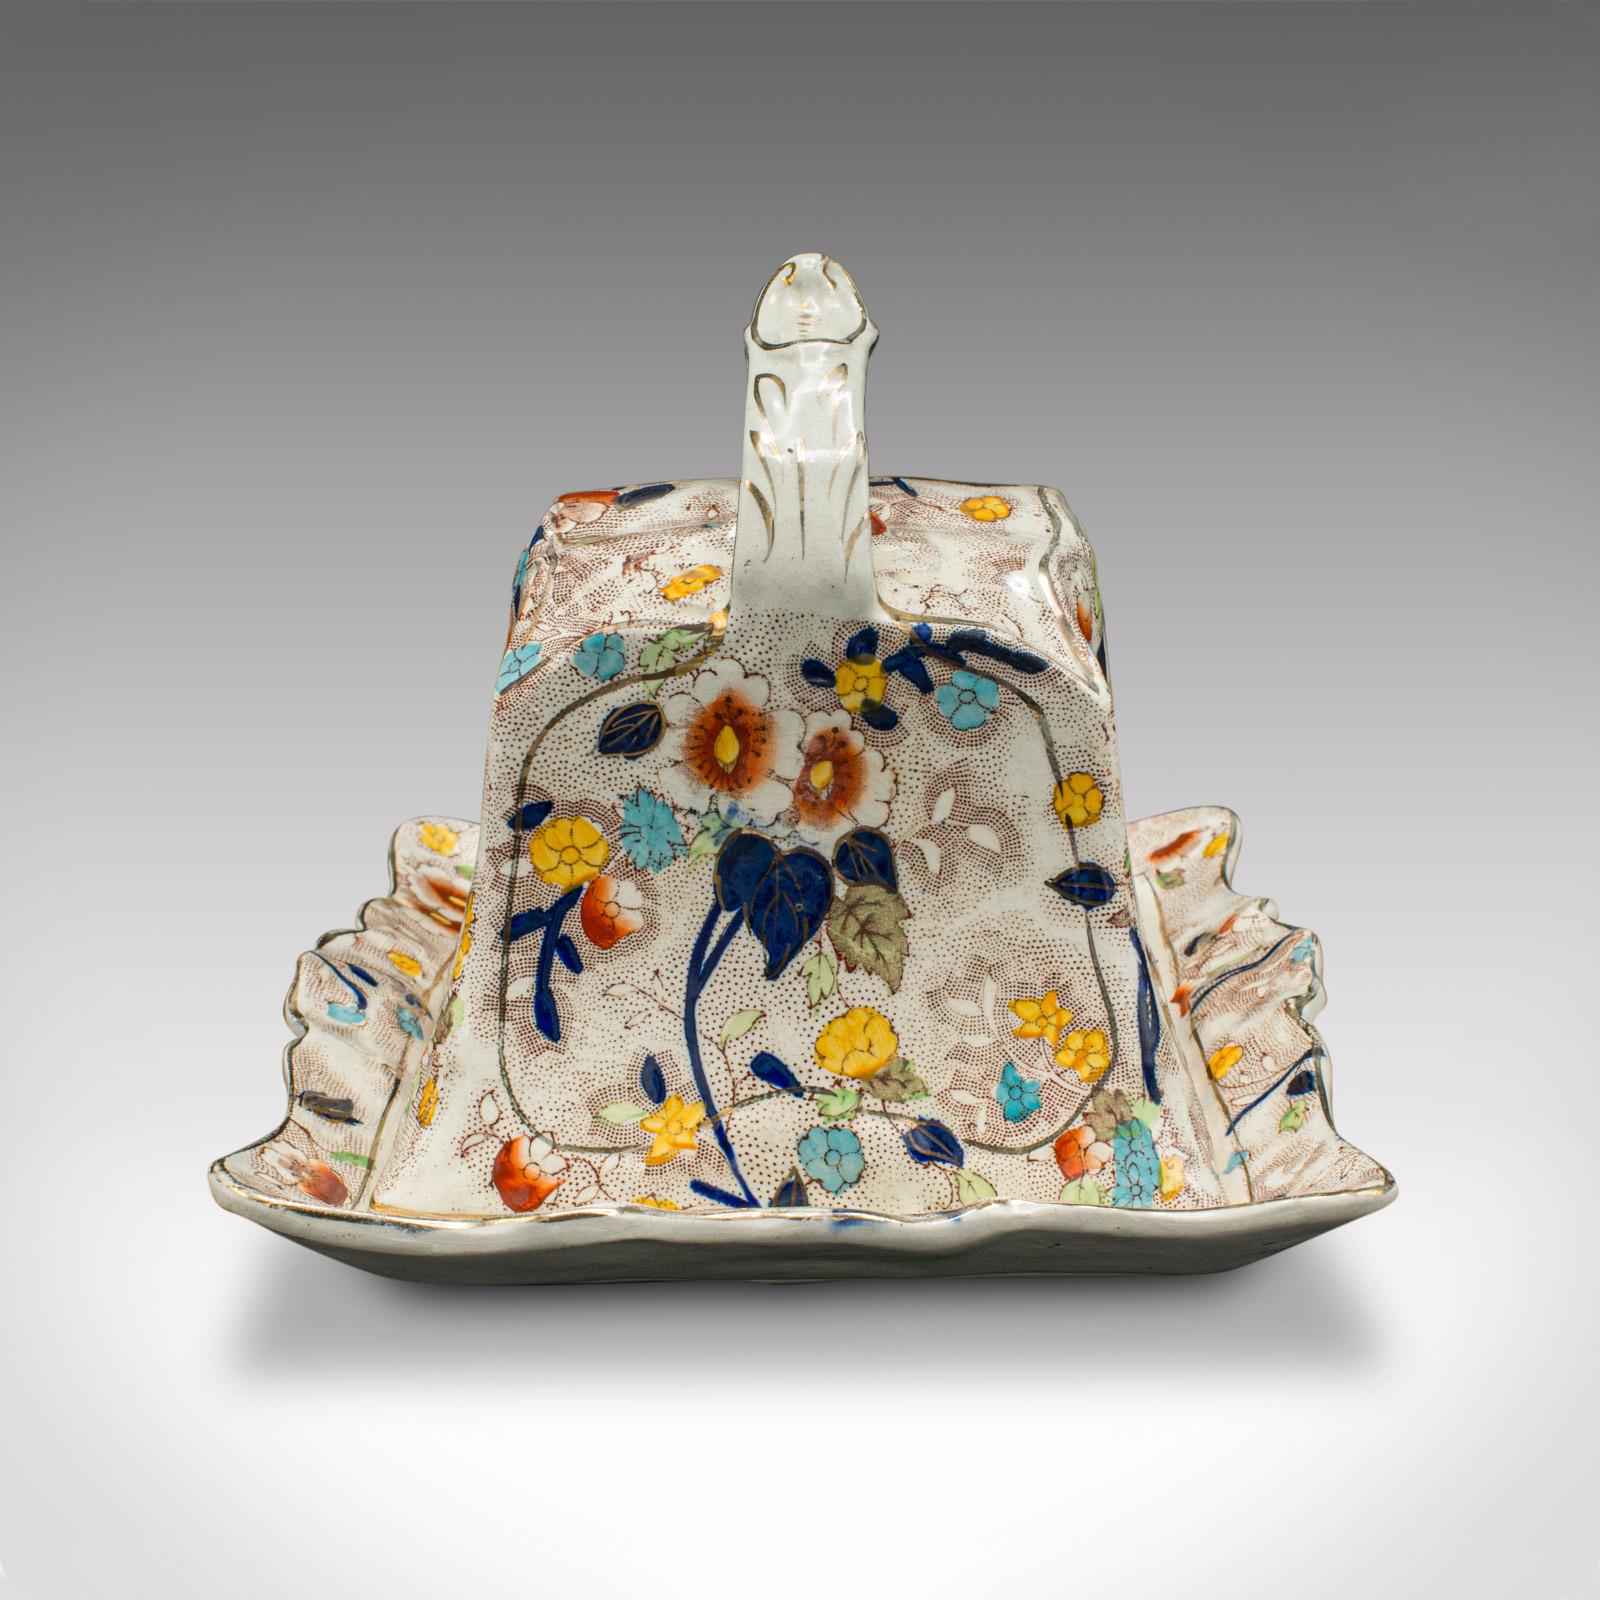 19th Century Antique Cheese Keeper, English, Ceramic, Decorative Butter Dish, Victorian, 1900 For Sale